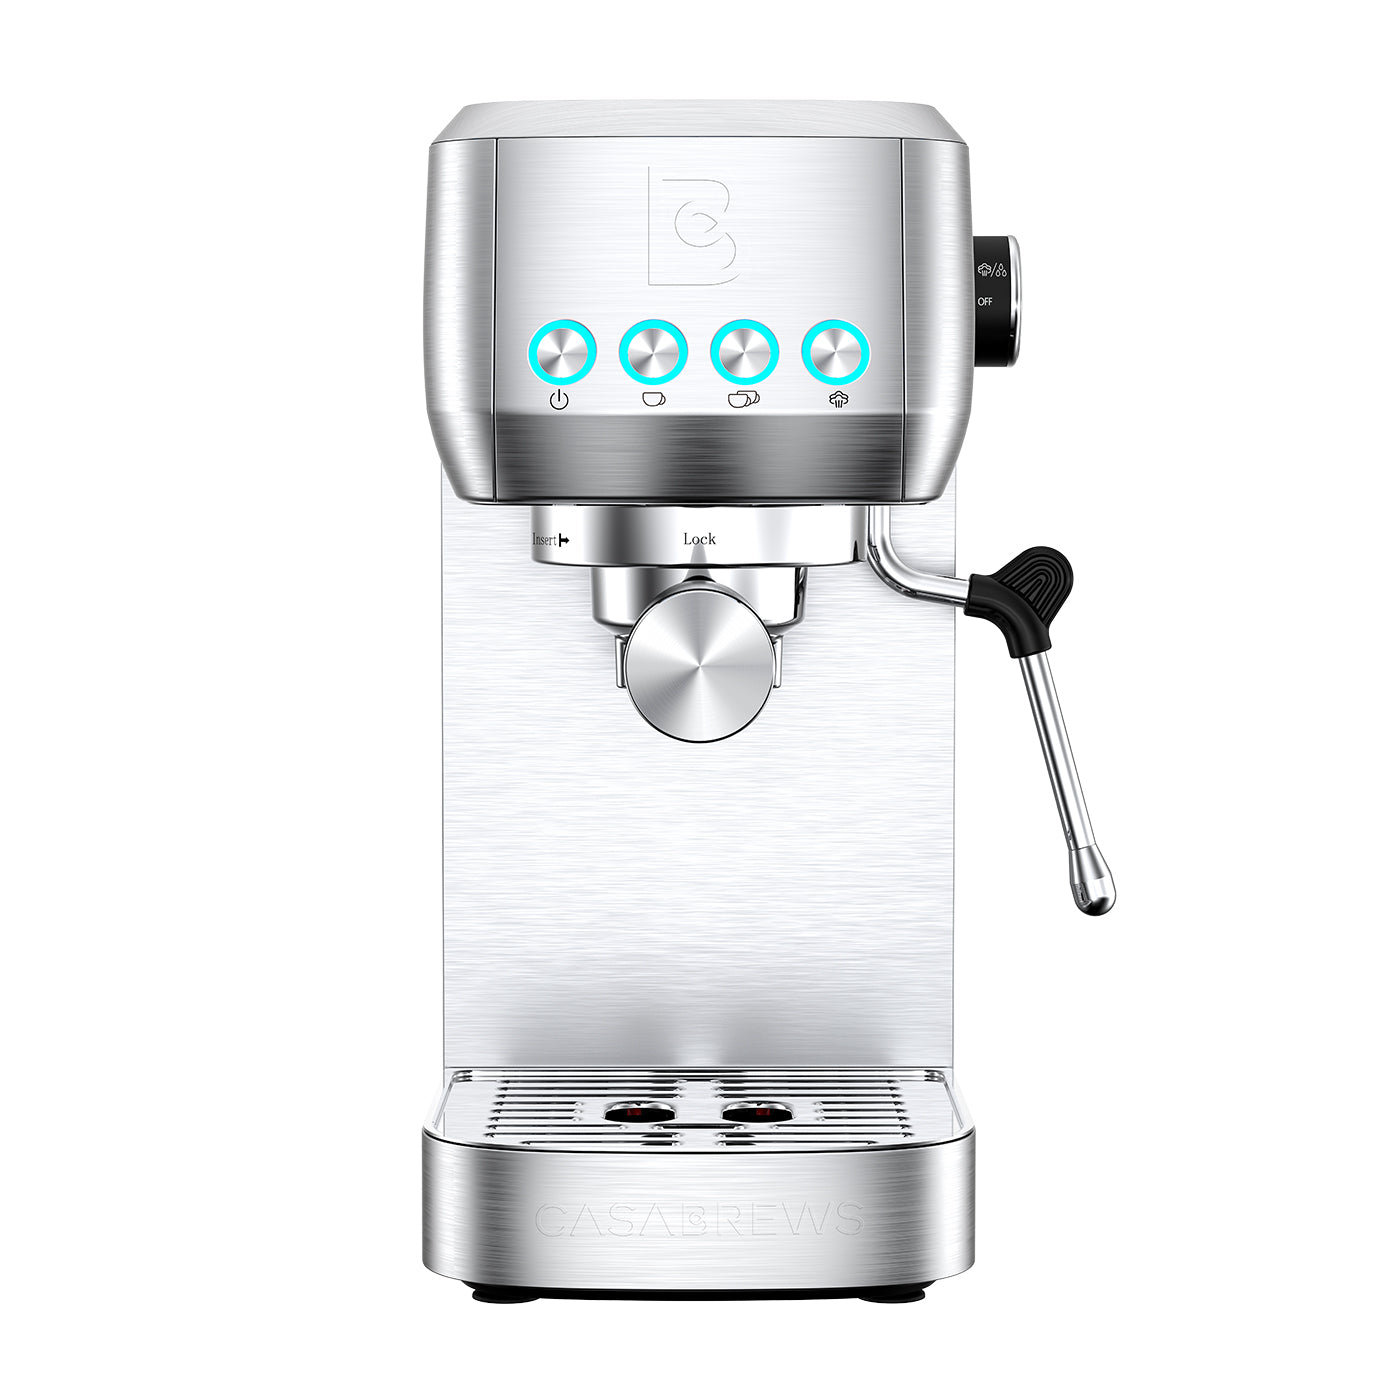 Bene Casa 4-Cup Espresso Maker with Milk Frother 